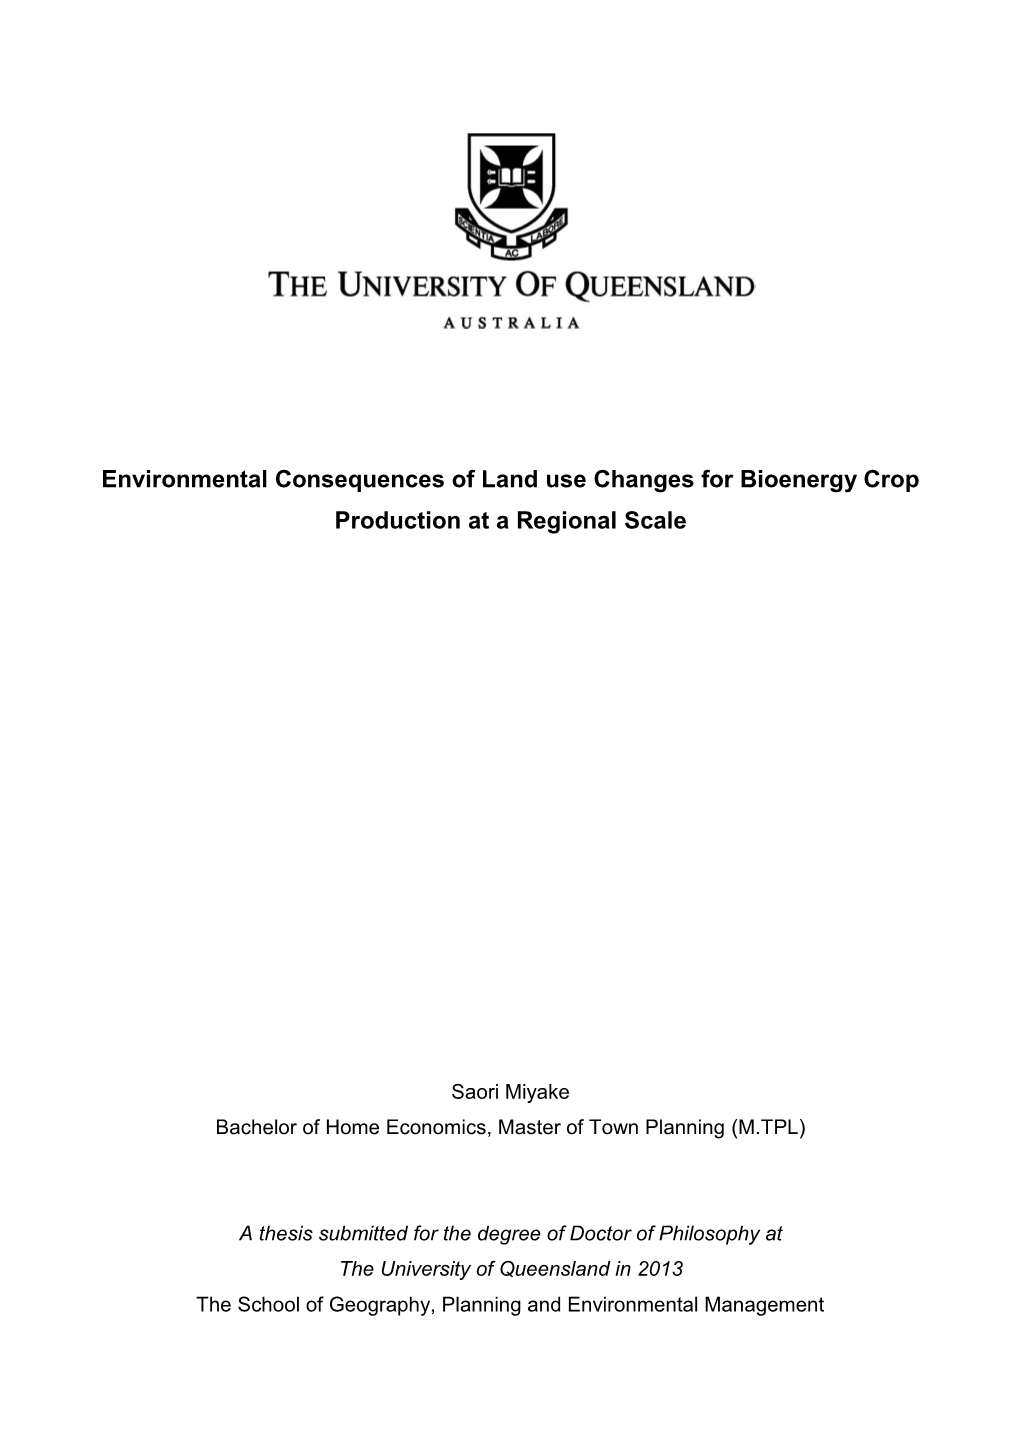 Environmental Consequences of Land Use Changes for Bioenergy Crop Production at a Regional Scale